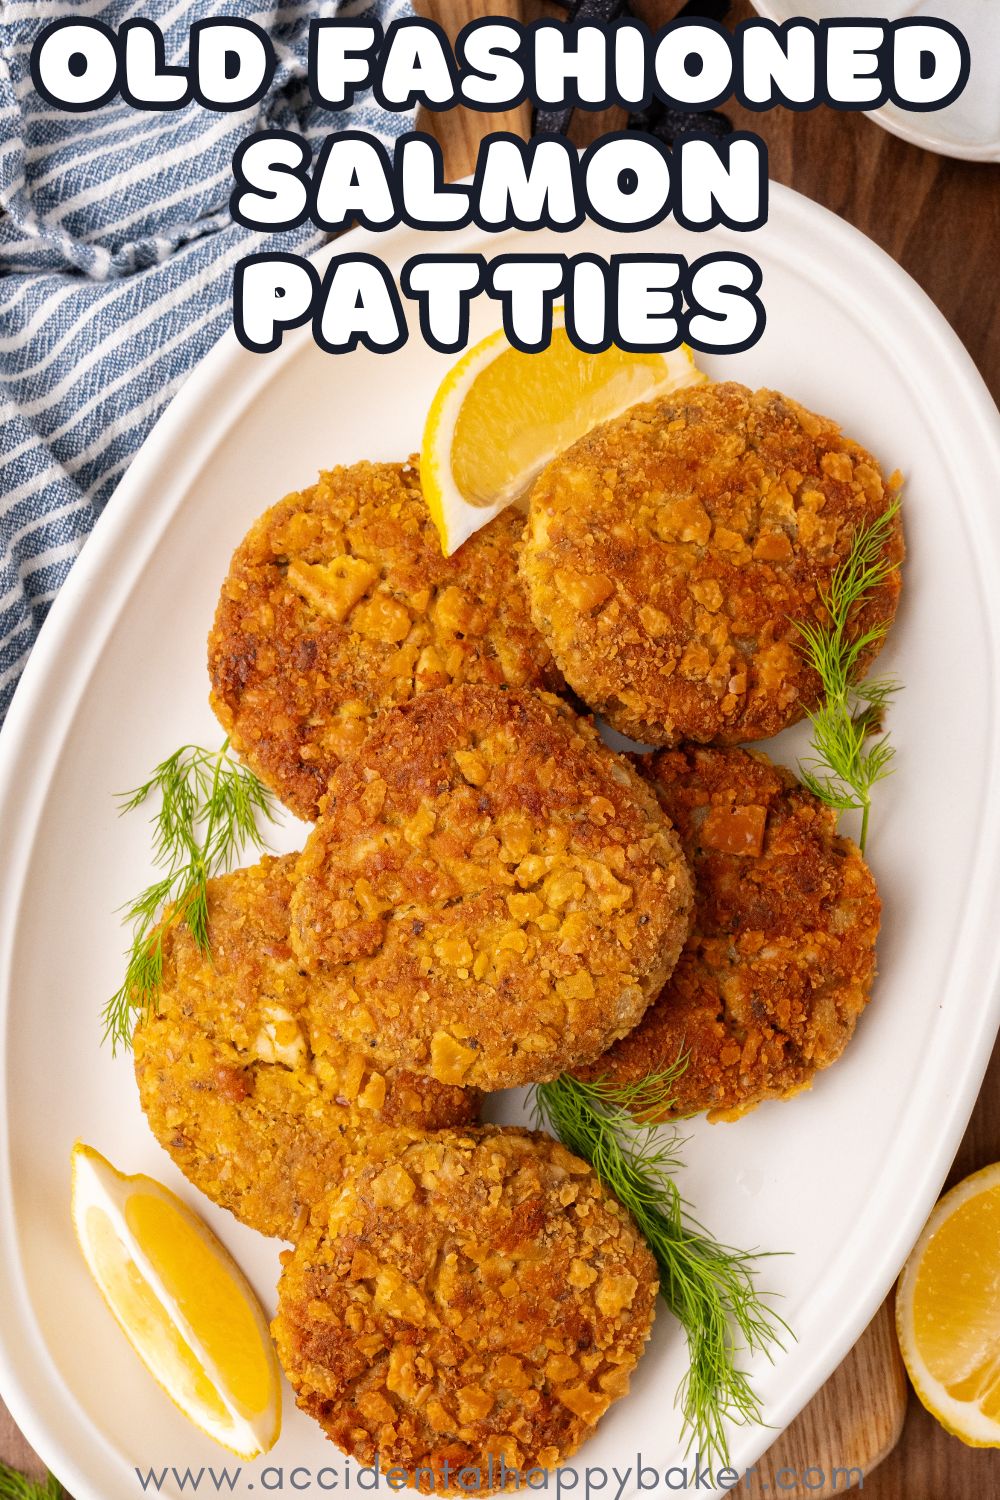 Old Fashioned Salmon Patties just like Grandma used to make! Golden brown and crisp on the outside, tender and moist on the inside, these salmon patties are easy to make and budget friendly. Enjoy a recipe that stands the test of time!